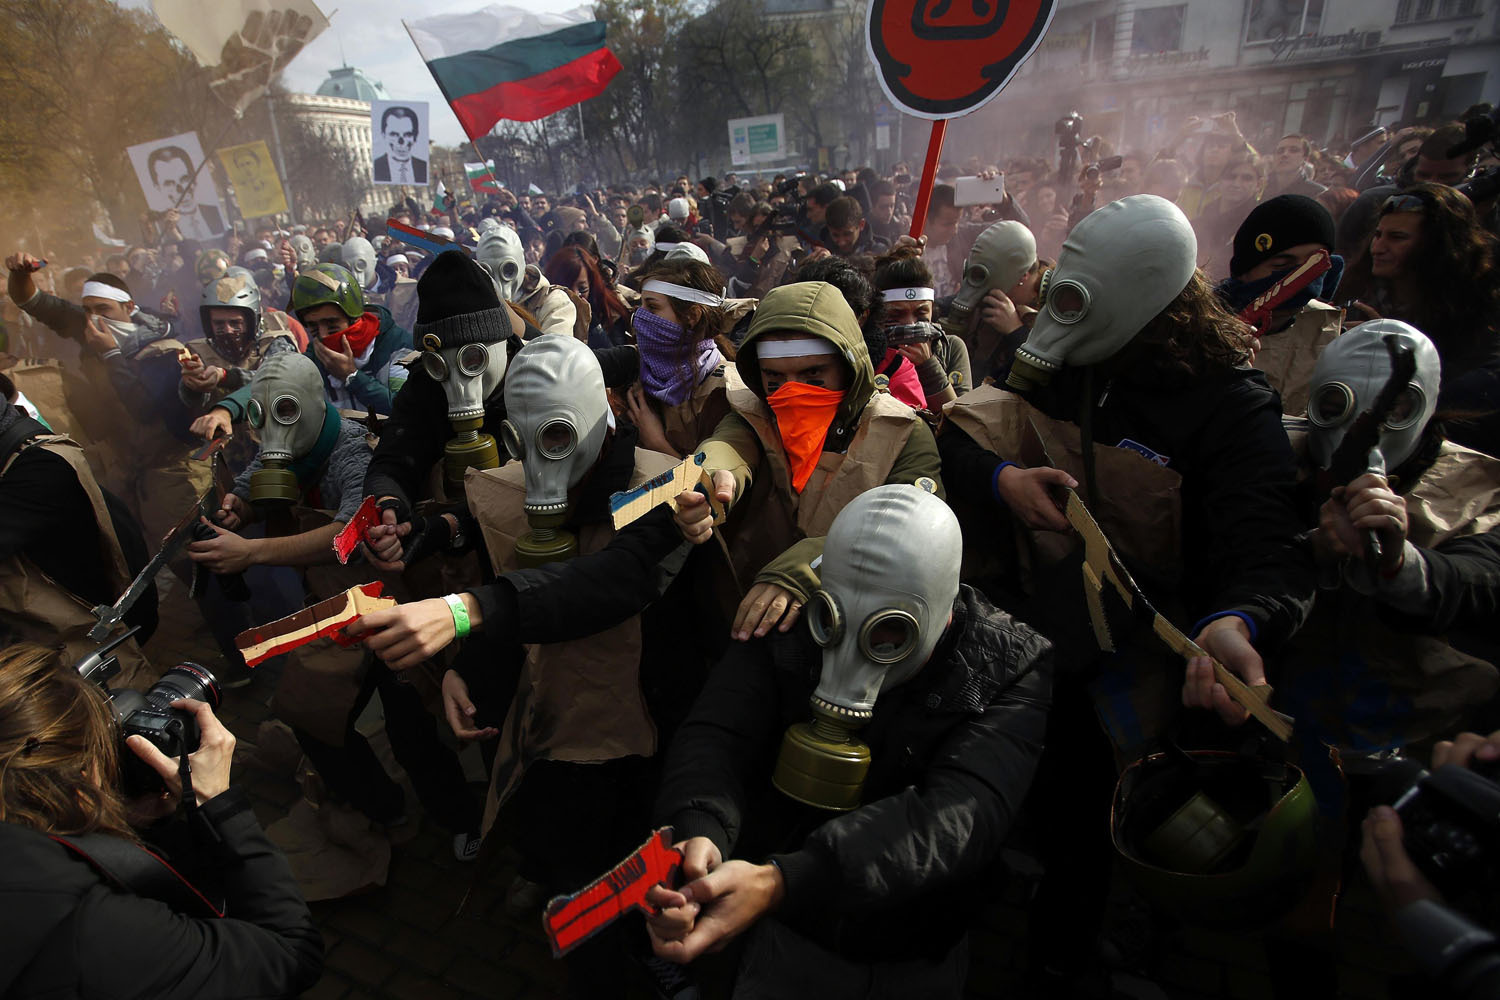 Nov. 20, 2013. Protesting students wearing gas masks and carrying fake guns made of cardboard participate in a demonstration in front of the parliament in Sofia, Bulgaria.